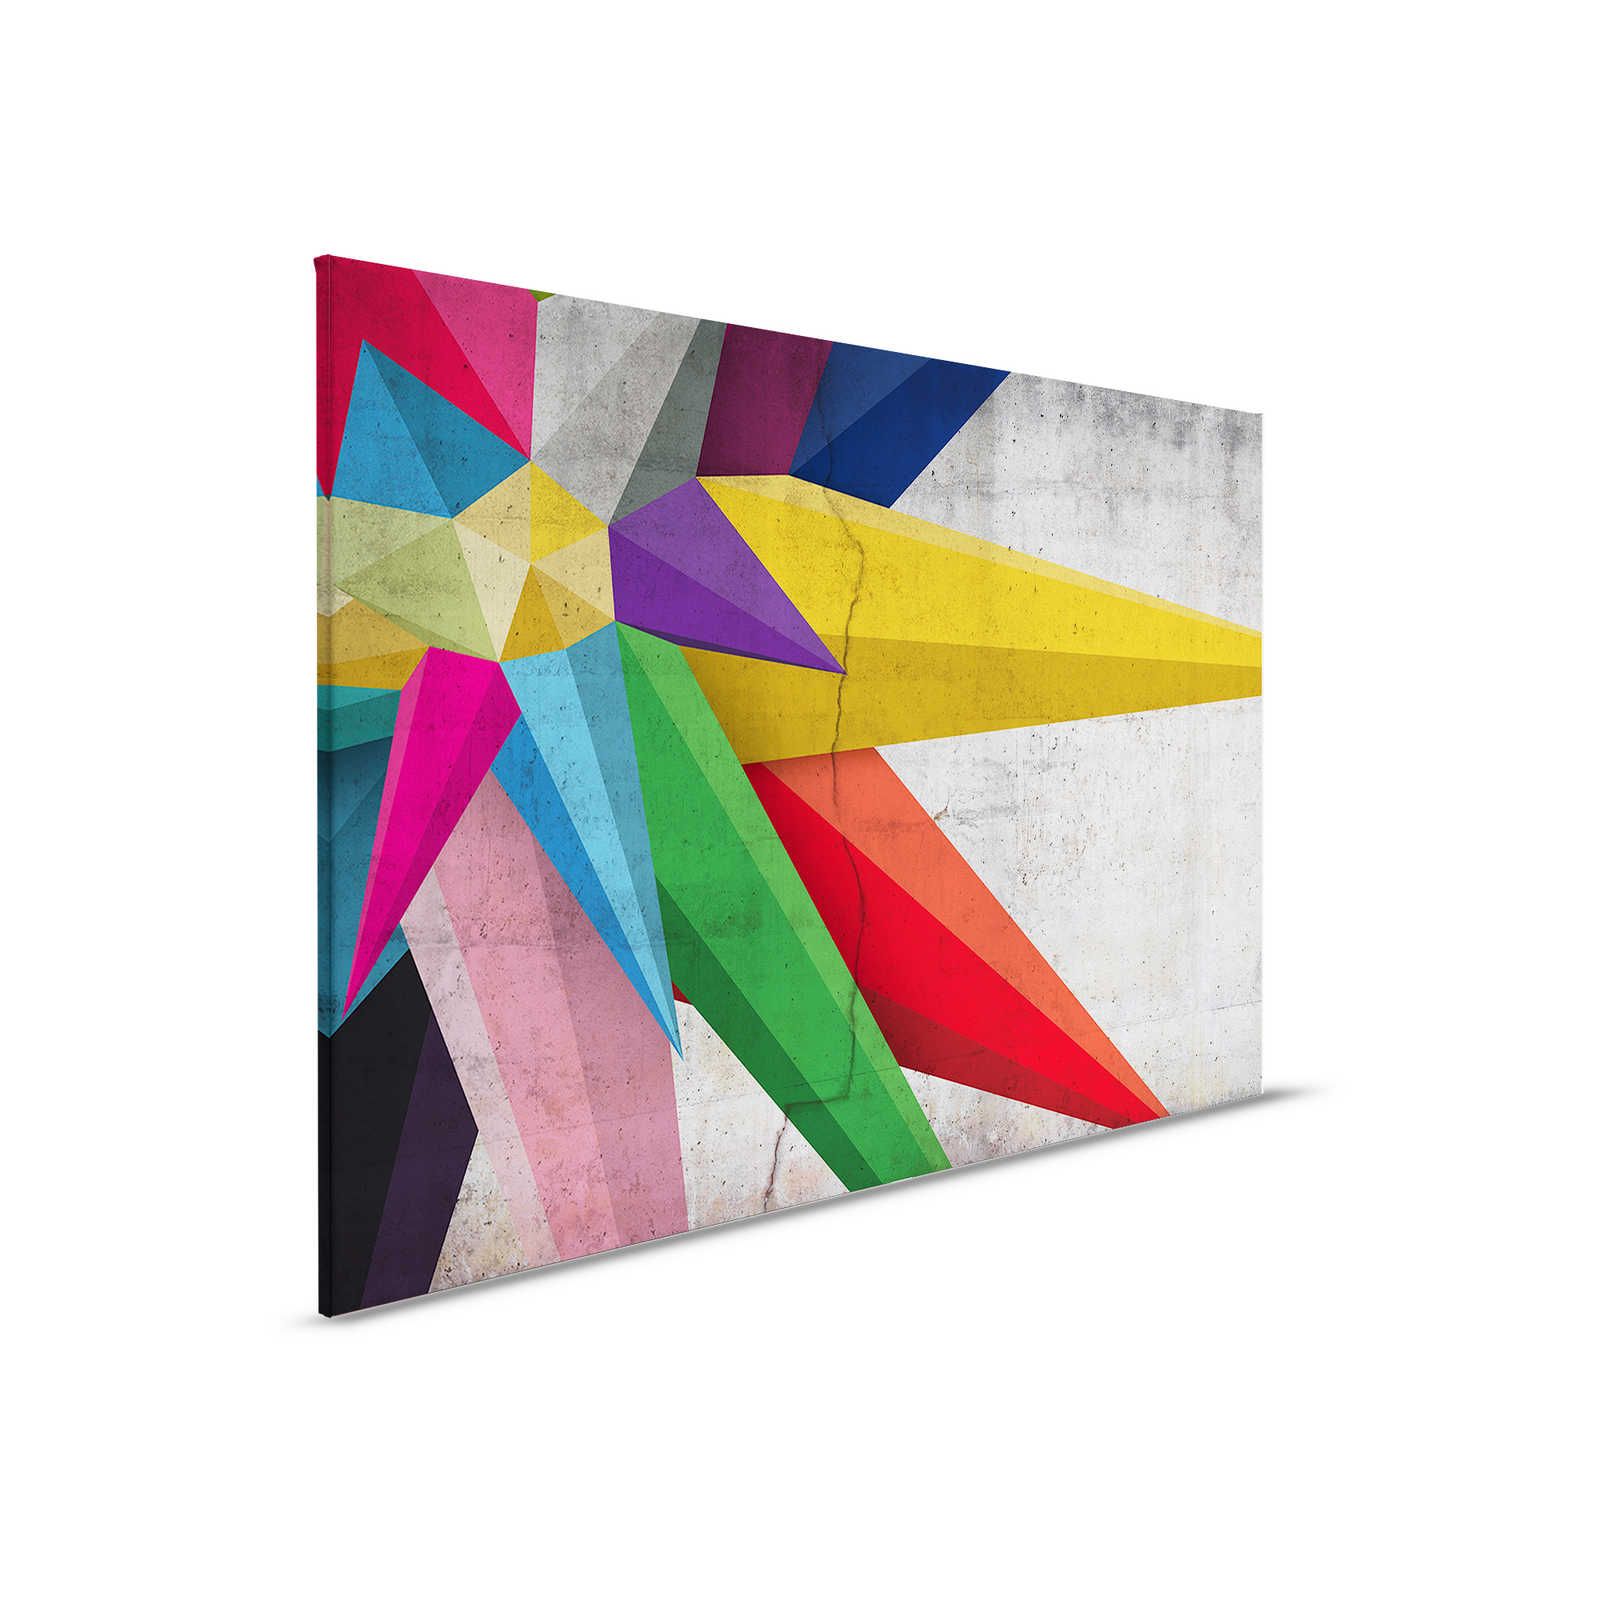         Concrete Canvas Painting with Polygon Style Star Graphic - 0.90 m x 0.60 m
    